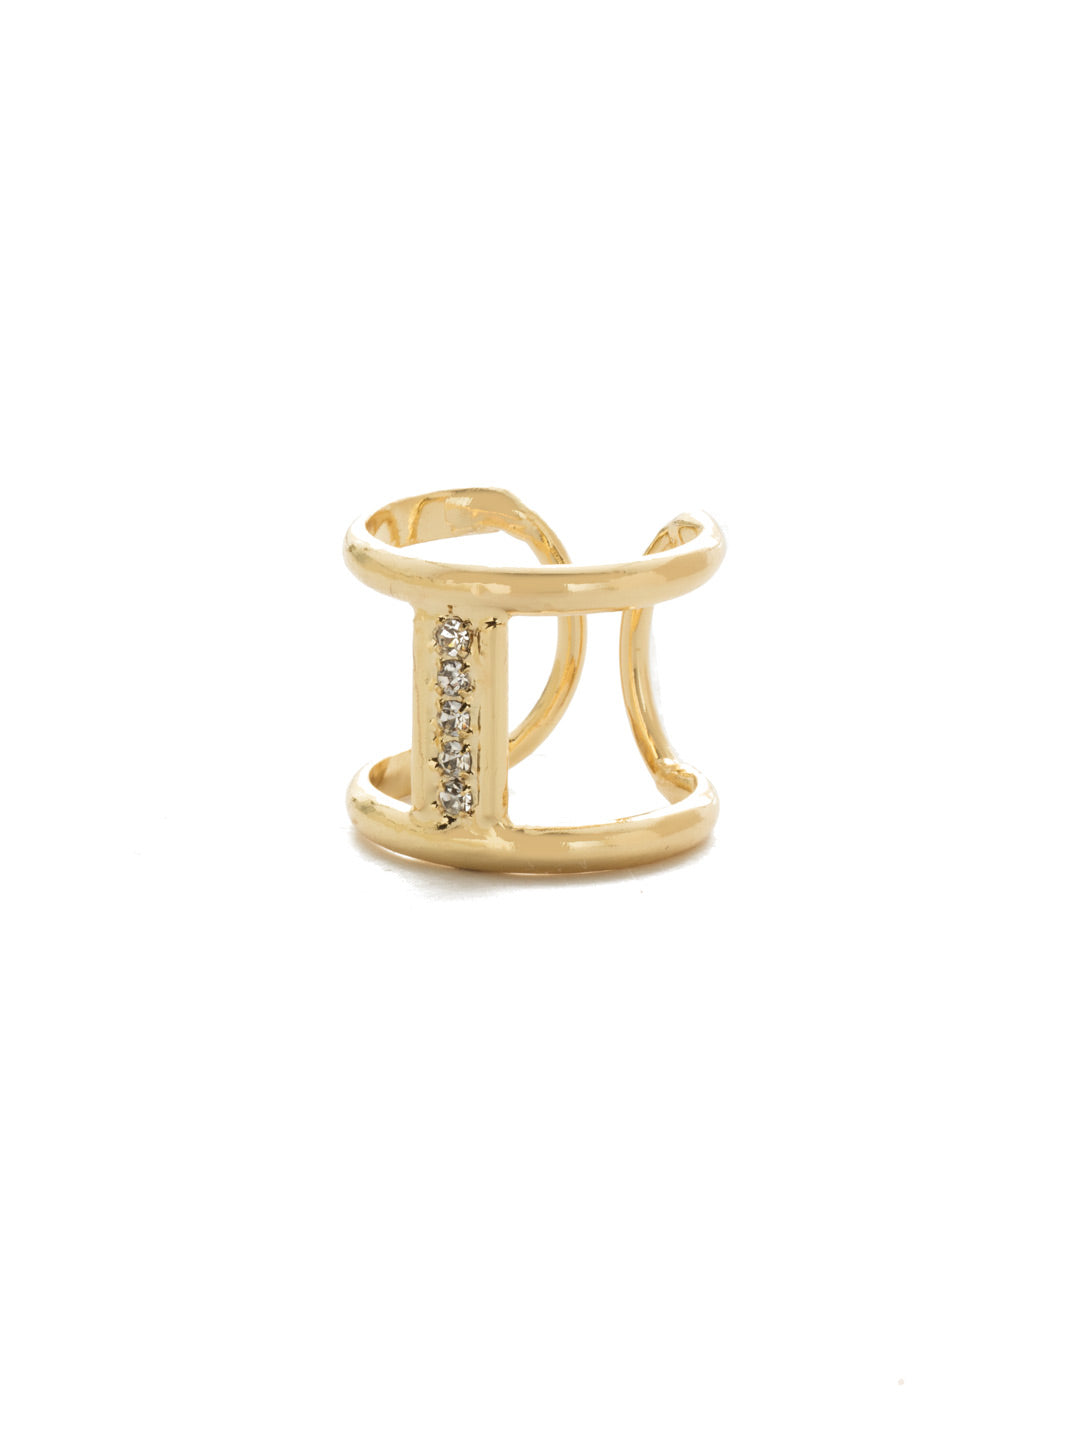 Amenia Offset Double Band Ring - 4REK23BGCRY - <p>Big metal fun with a center of sparkling crystal gems. Slide this ring on any finger and everyone will take your style game seriously. From Sorrelli's Crystal collection in our Bright Gold-tone finish.</p>